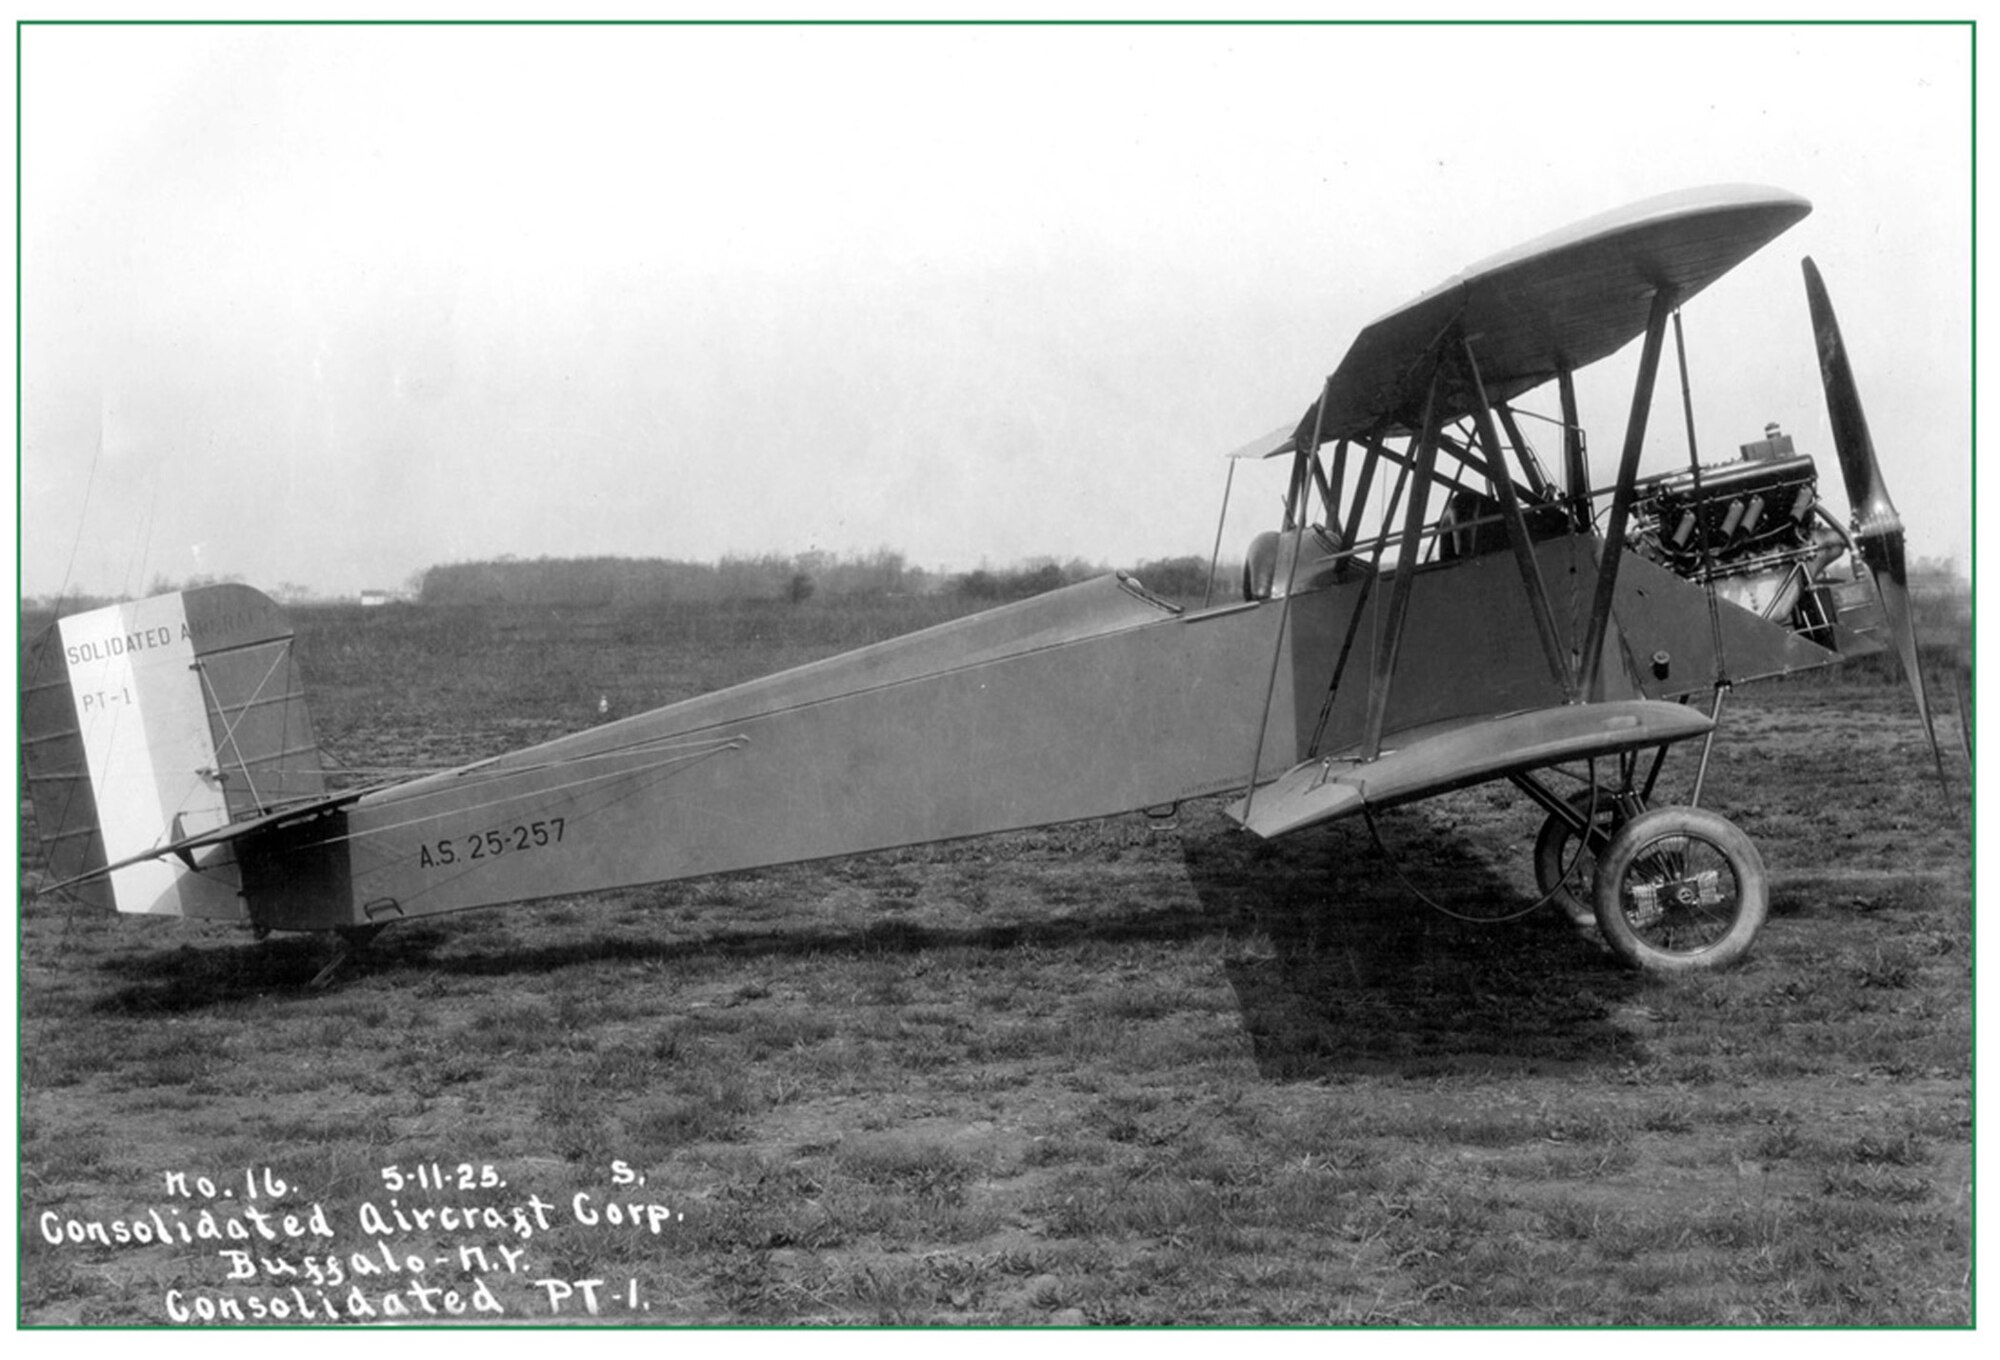 Consolidated Aircraft Corporation PT-1 “Trusty” on the line at Robertson Field, Saint Louis, 1925.  The PT-1 was a bi-plane primarily utilized for training pilots (131st Bomb Wing file photo/RELEASED)